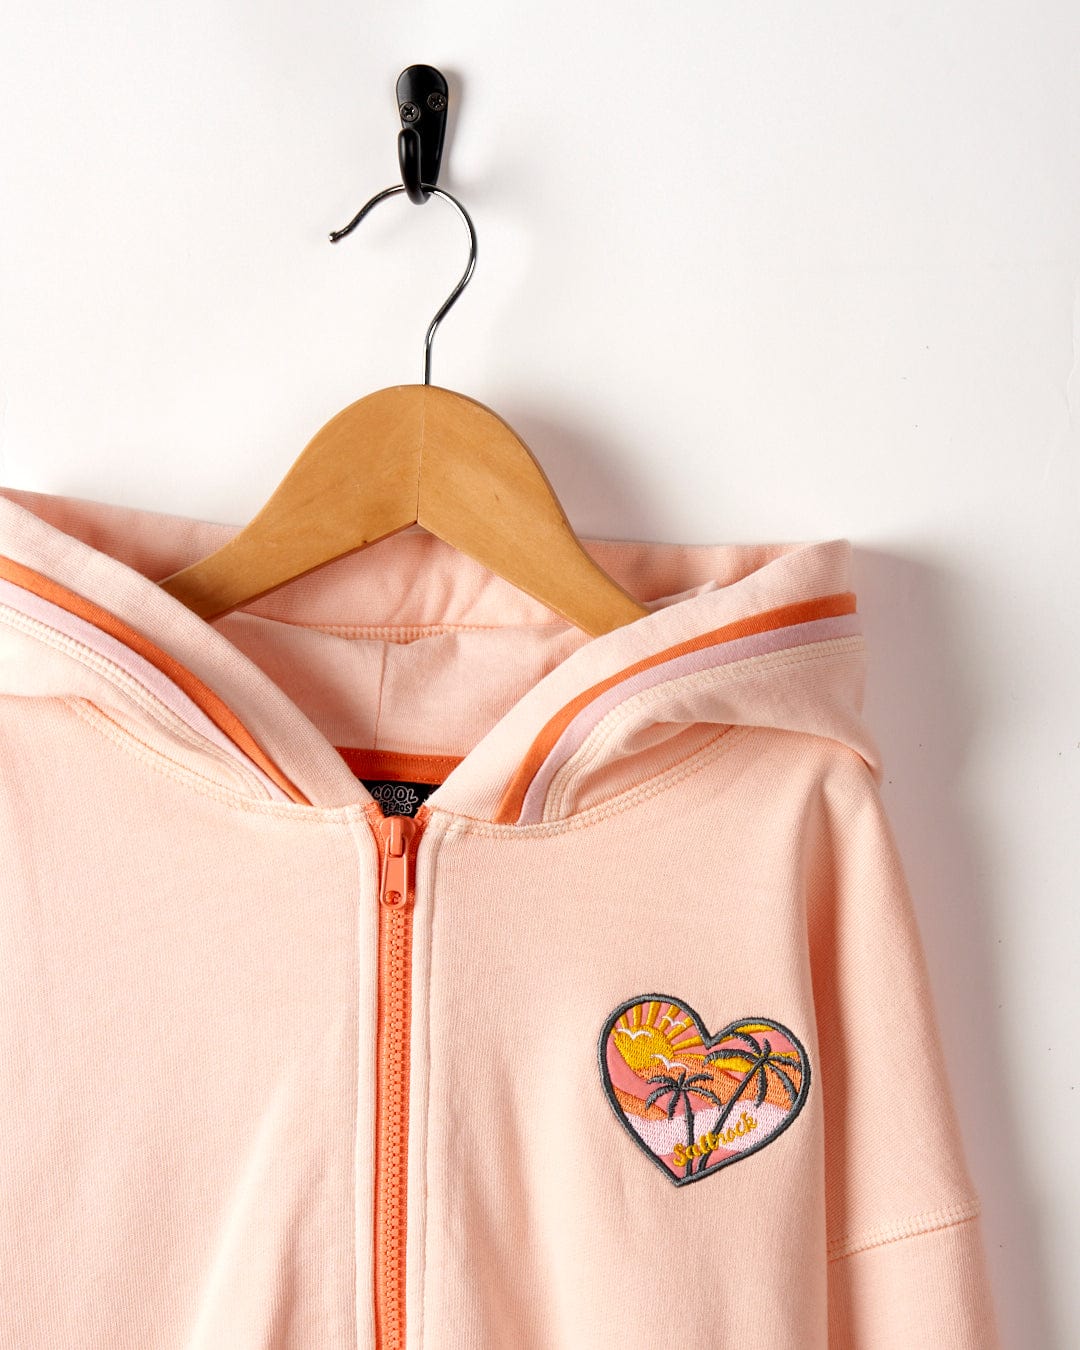 A Sunshine State - Kids Zip Hoodie in Peach with a tropical sunset patch over the left chest, hanging from a wooden hanger on a white background. Made from 100% cotton by Saltrock.